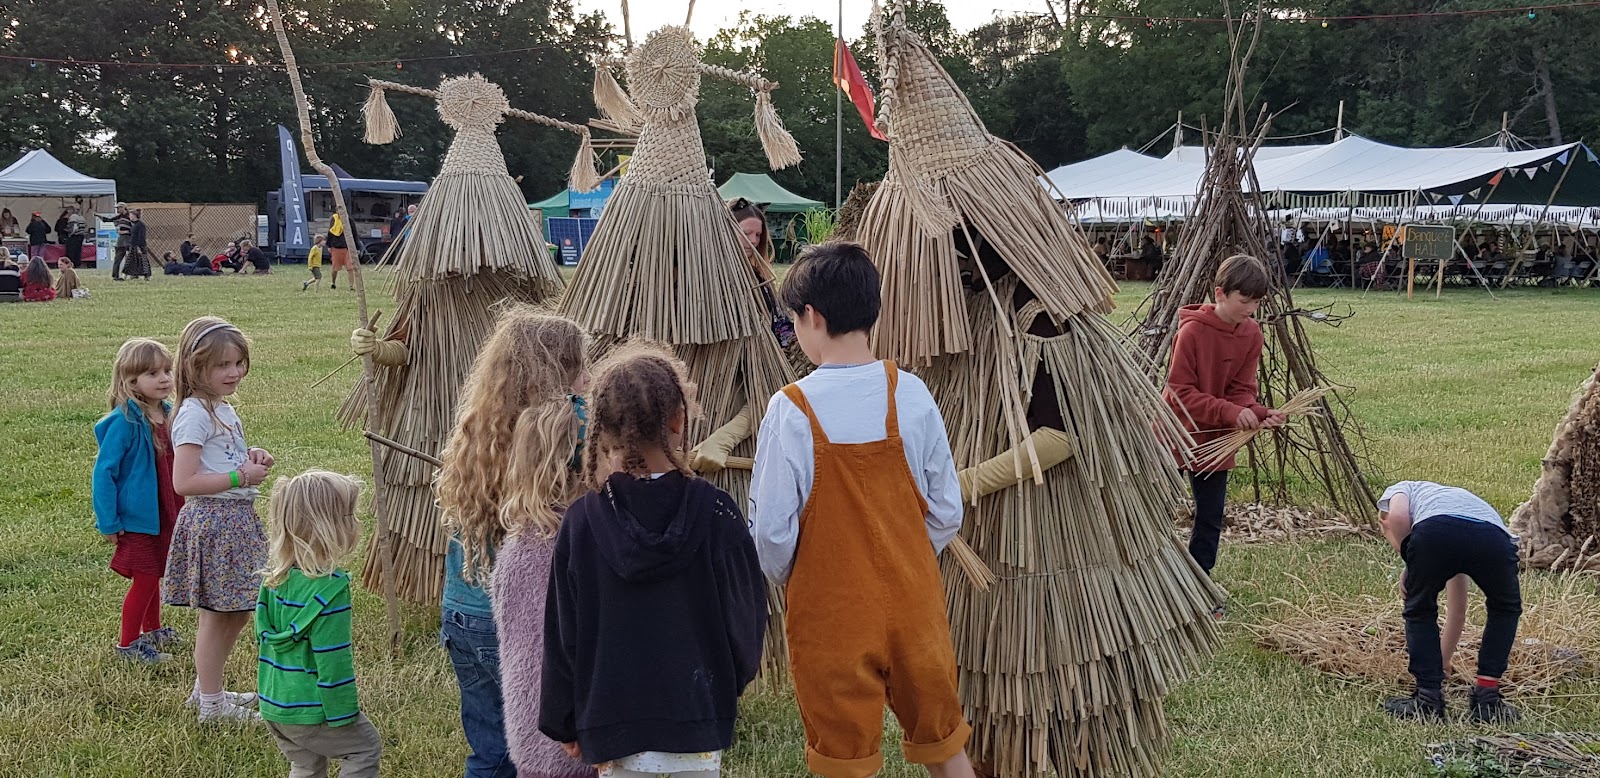 Three 'mummers' dressed in straw outfits and head dresses which mask their faces hand out stalks of grain to children at the Land Skills Fair